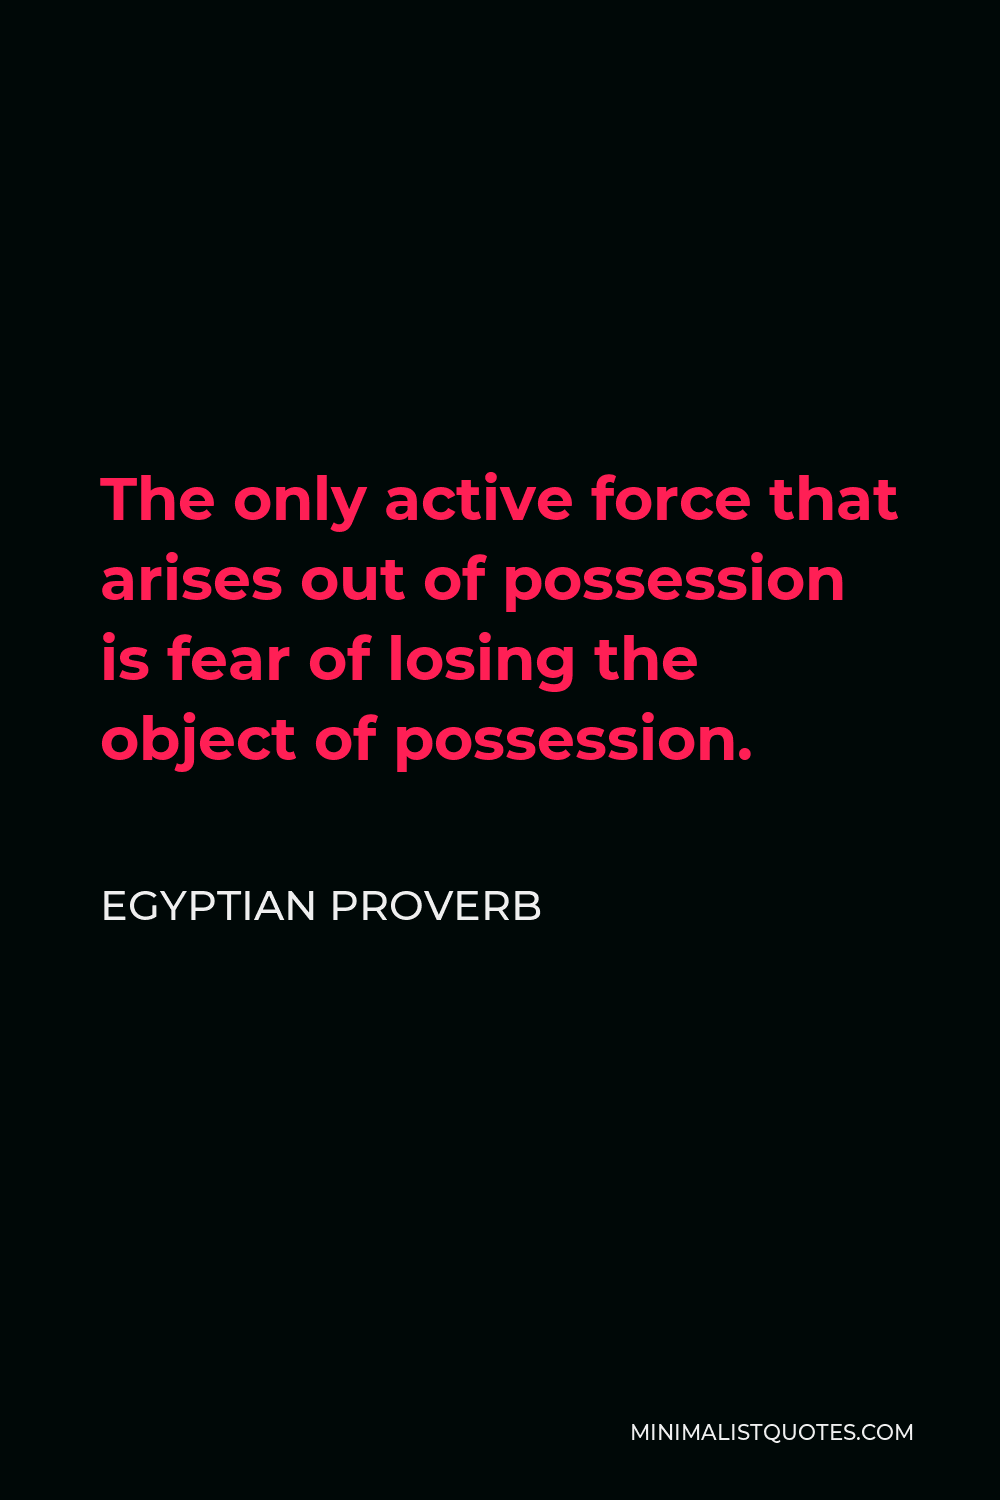 Egyptian Proverb Quote - The only active force that arises out of possession is fear of losing the object of possession.